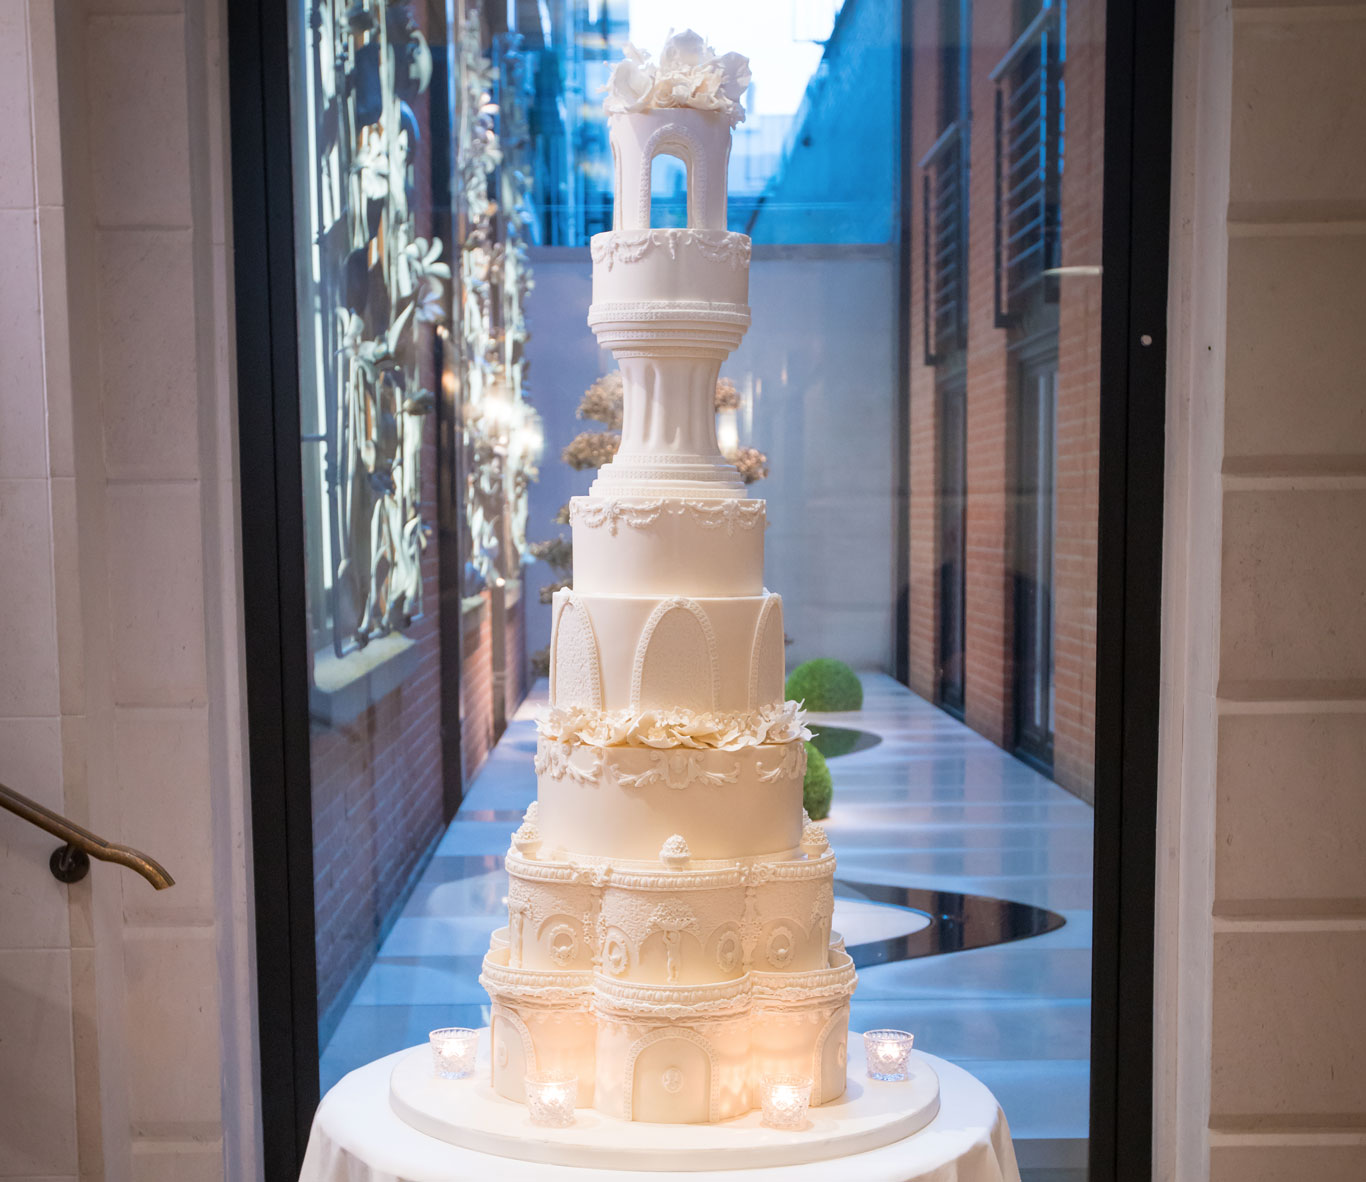 The Connaught Luxury Wedding Cake by GC Couture, Mayfair